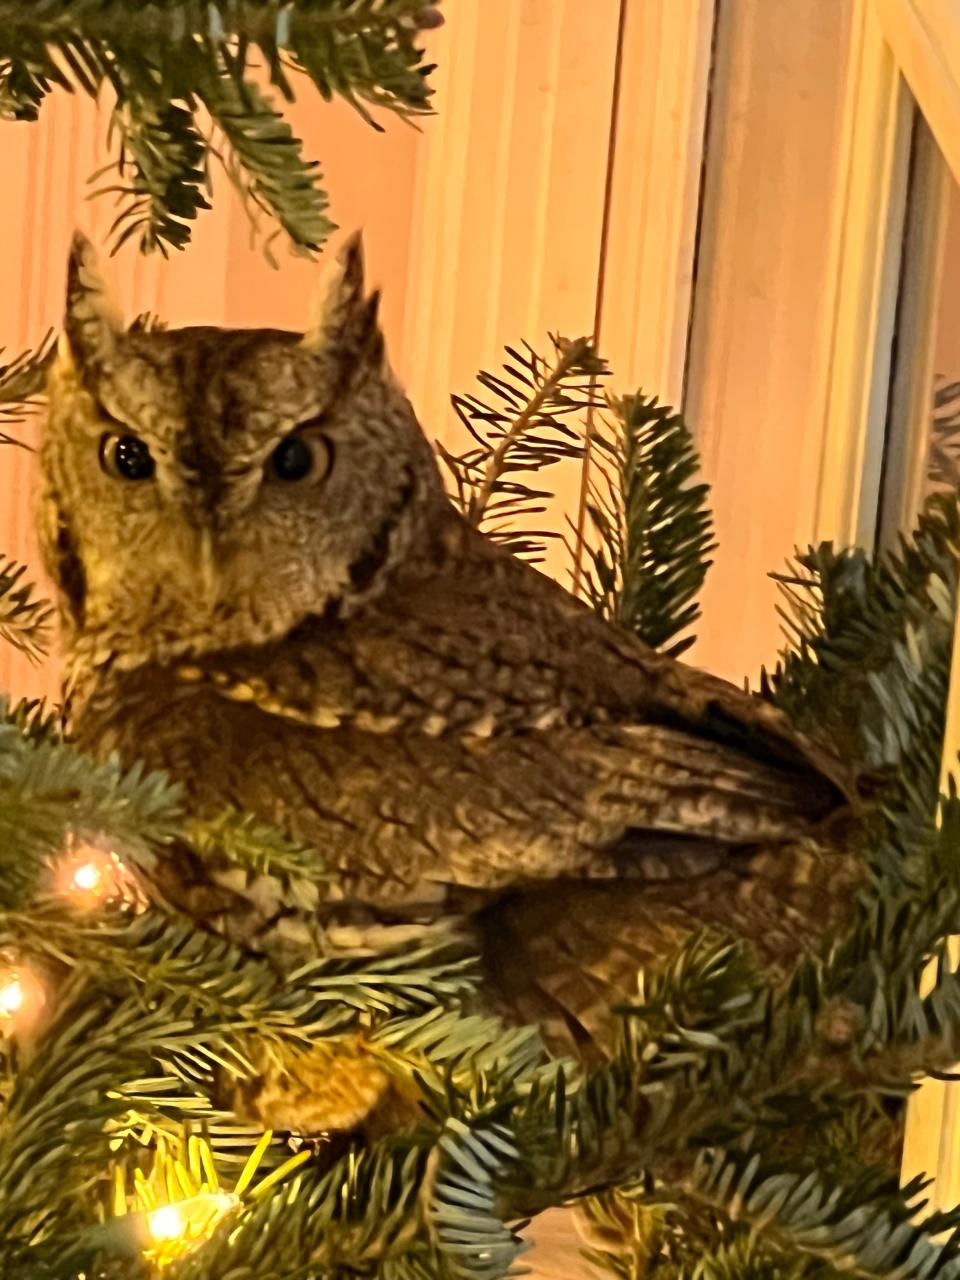 Pictures of the owl found in Christmas tree.